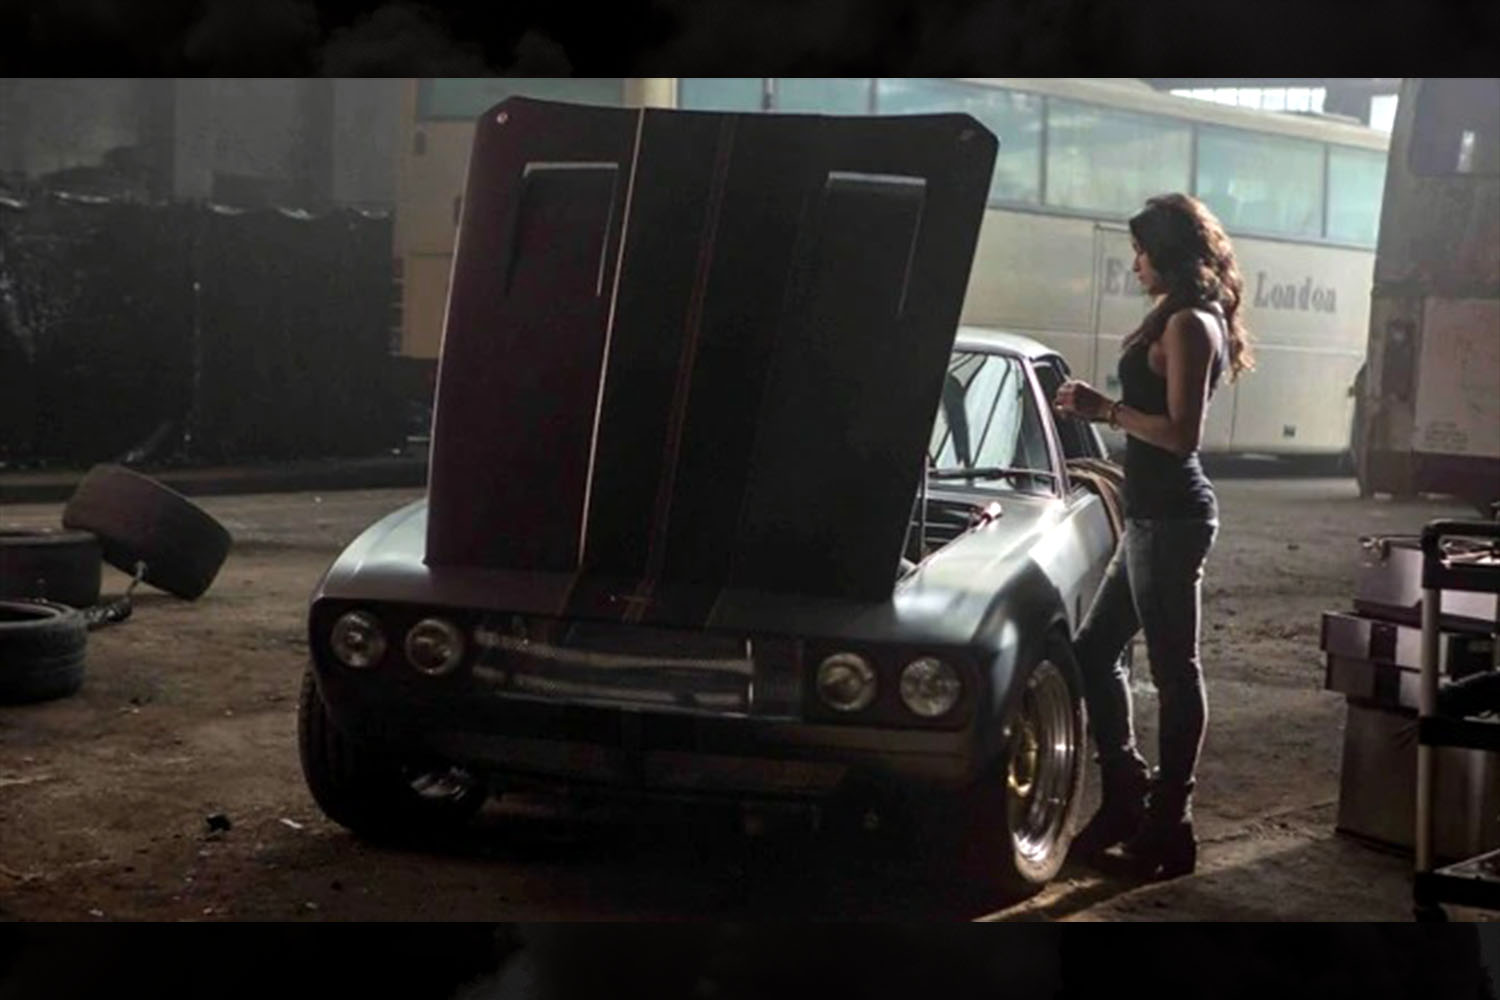 Letty Ortiz (Michelle Rodriguez) standing over a 1971 Jensen Interceptor in a garage in a scene from Fast & Furious 6